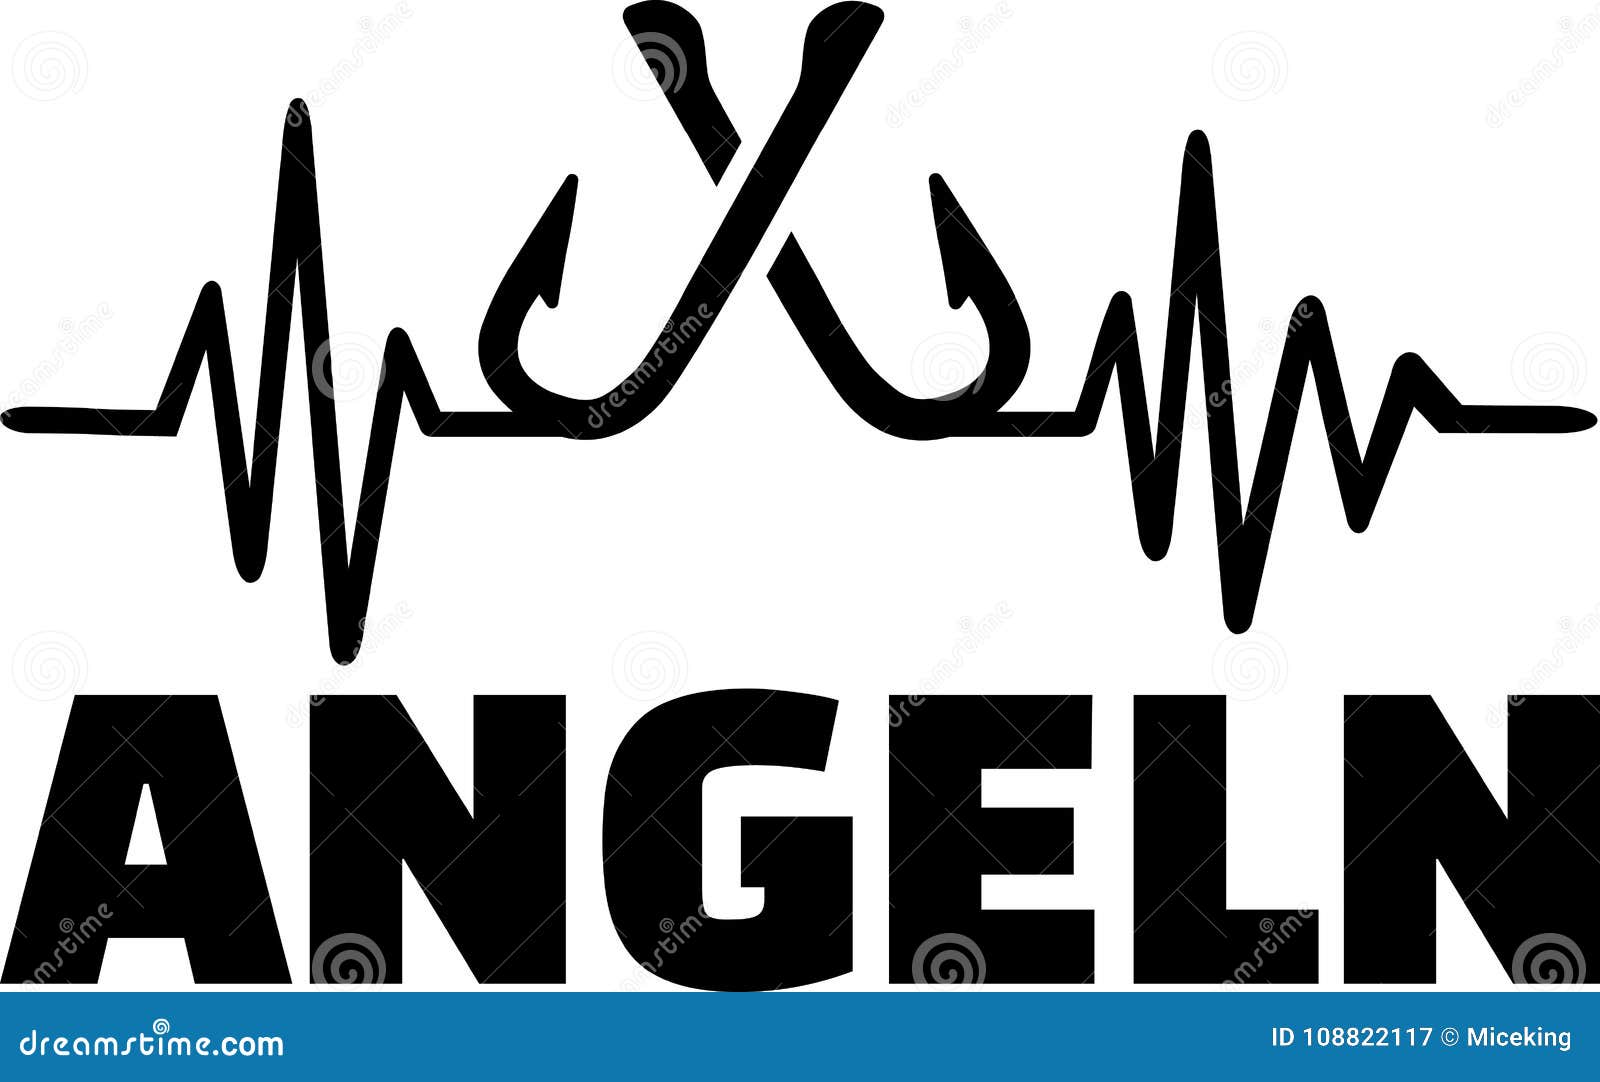 Download Fishing Heartbeat Line With Fisherman Stock Vector ...